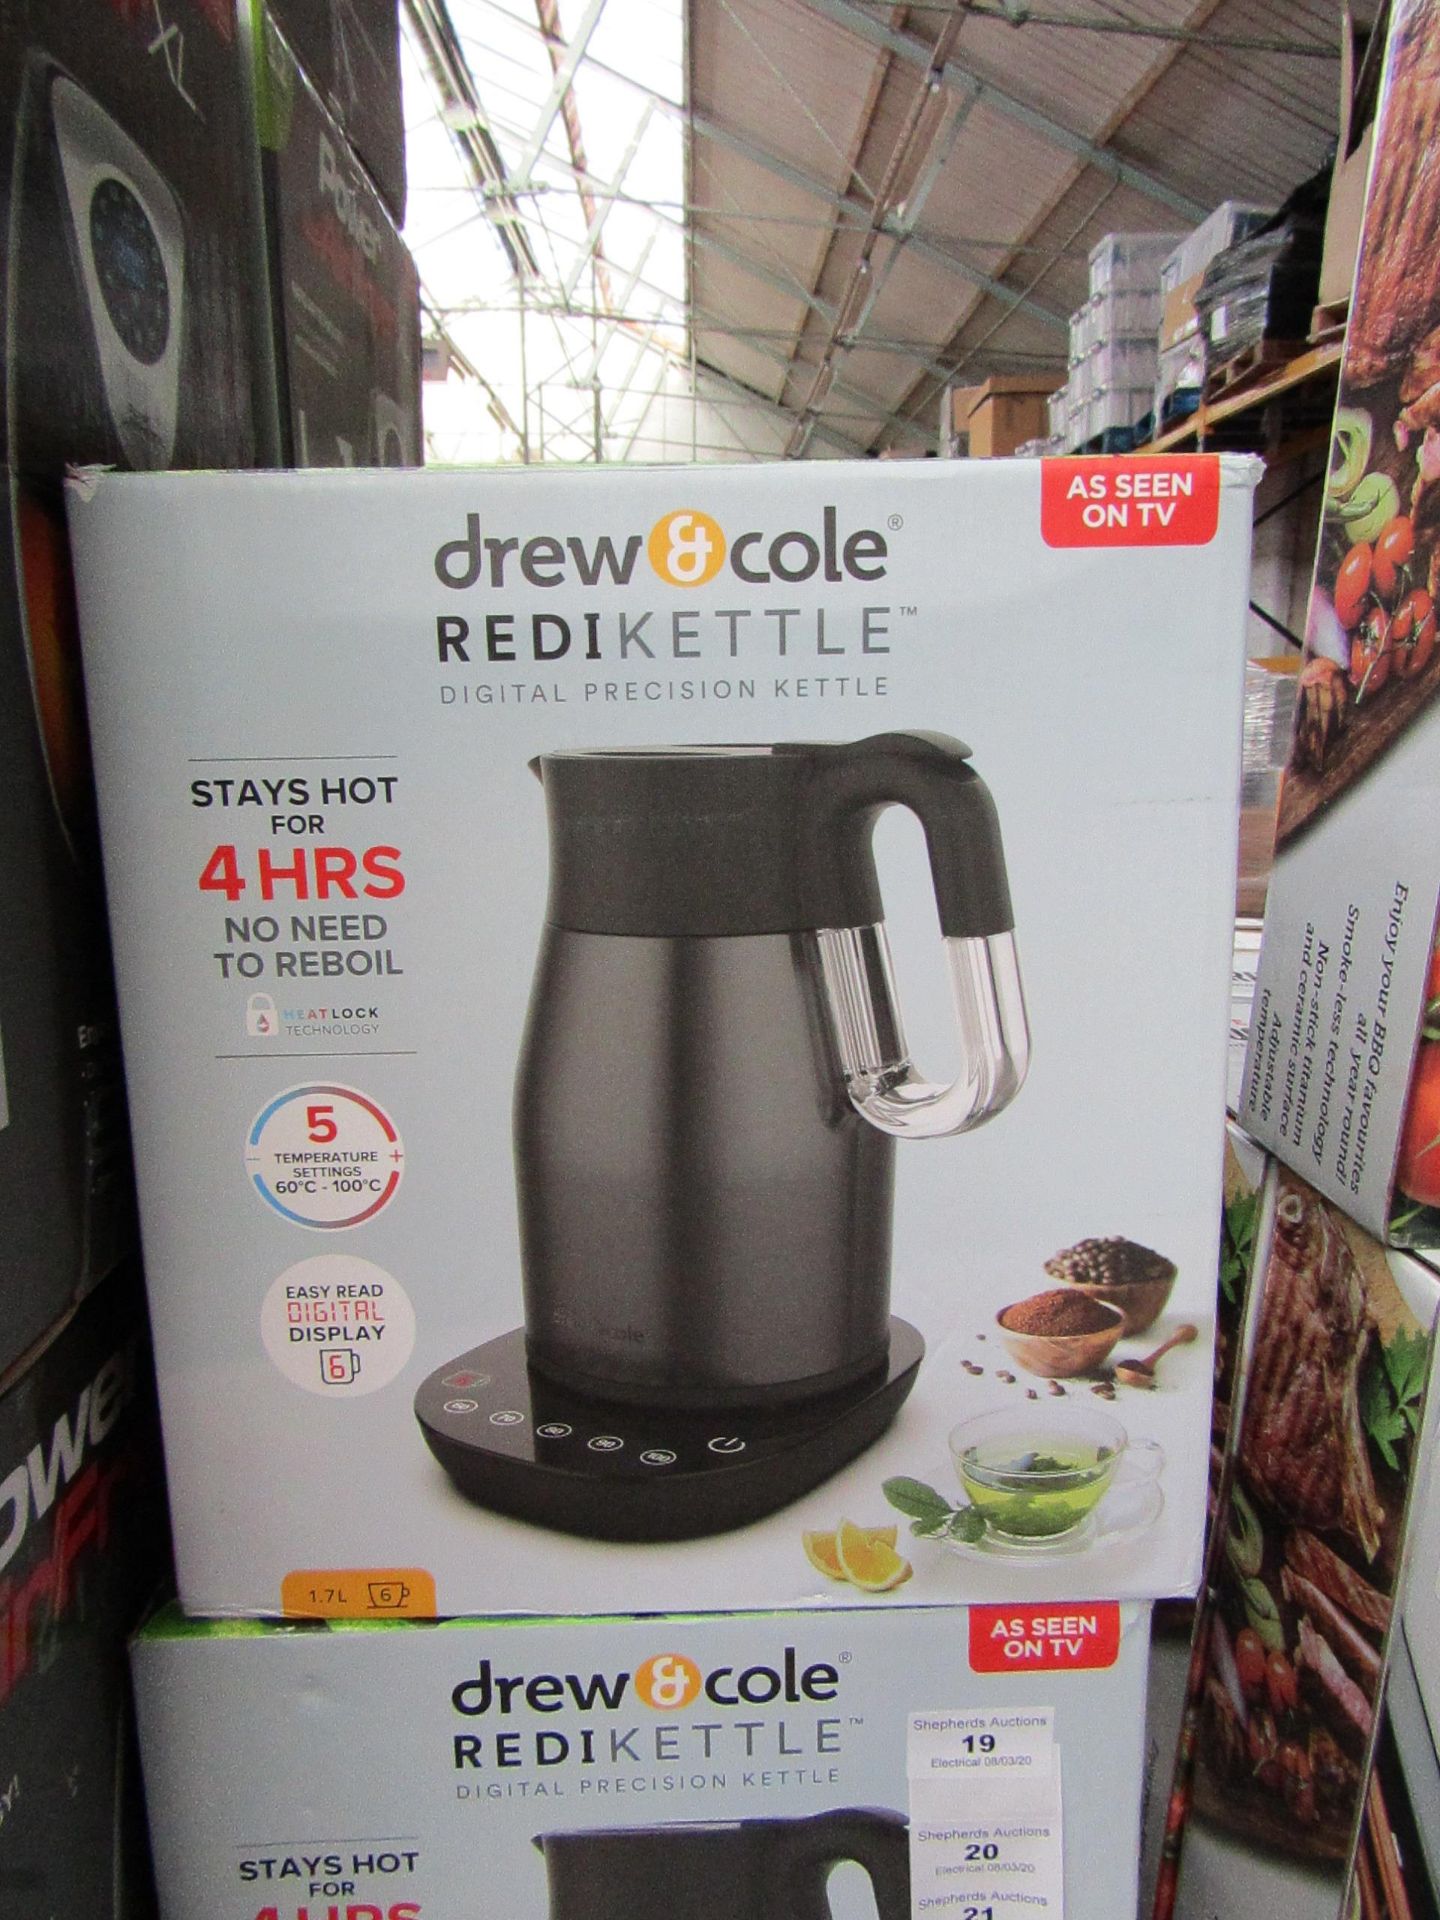 | 1X | DREW & COLE REDI KETTLE 1.7L | REFURBISHED AND BOXED | NO ONLINE RE-SALE | SKU C5060541513570